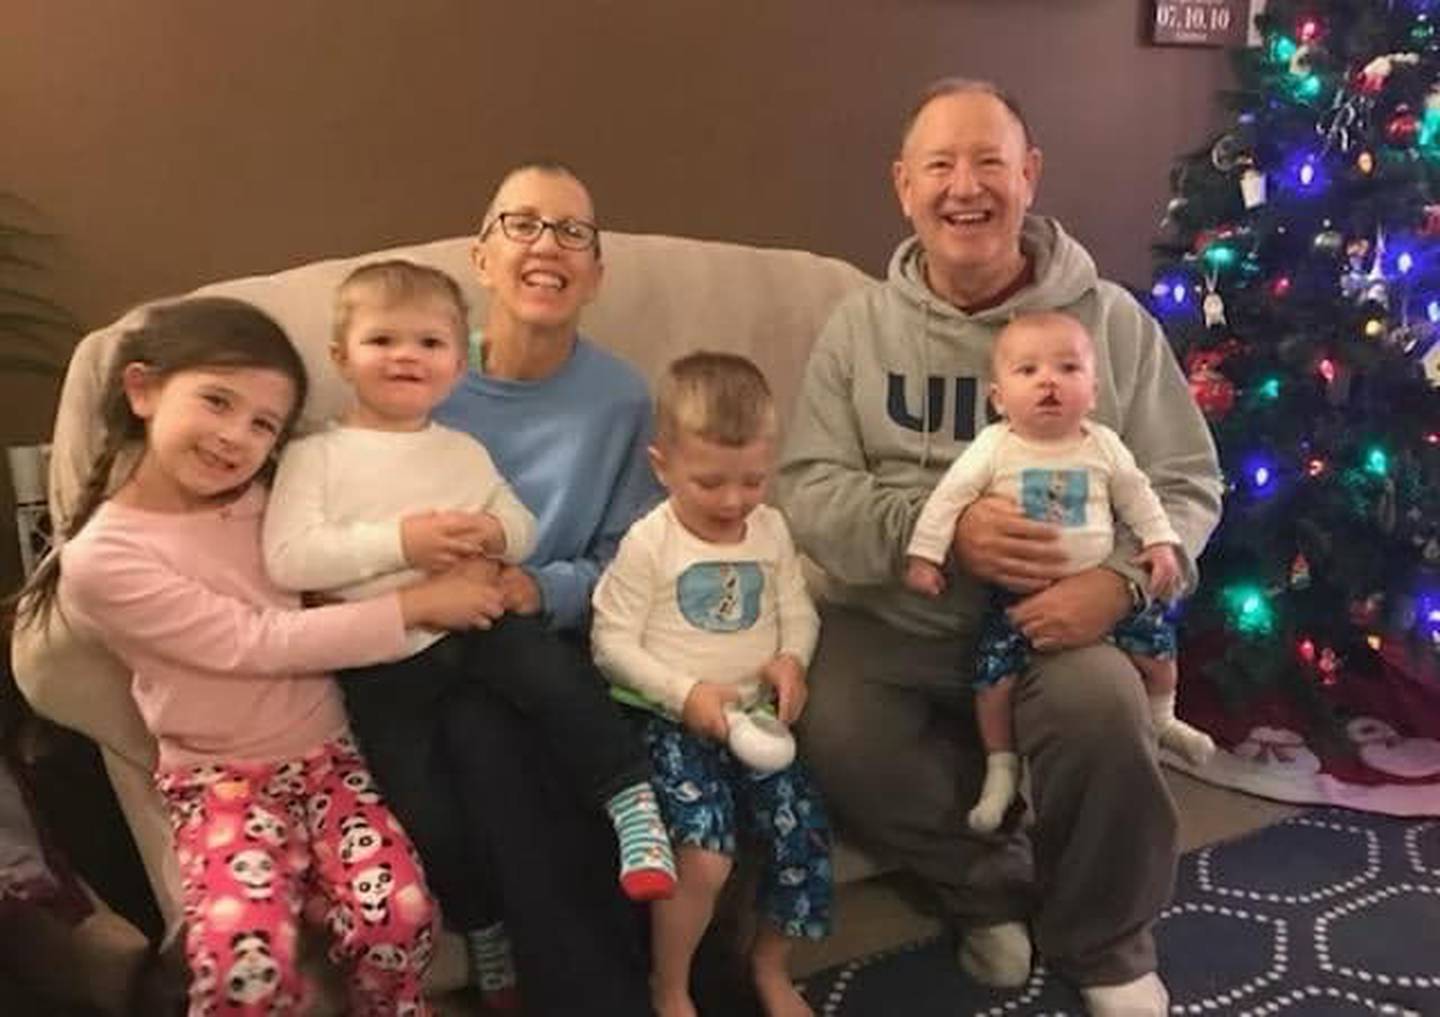 Timbers of Shorewoodv volunteer Joni Hilger and her husband Tom Hilger are seen with grandchildren Caleb, Blake, Kayden and Ryleigh near the Christmas tree.